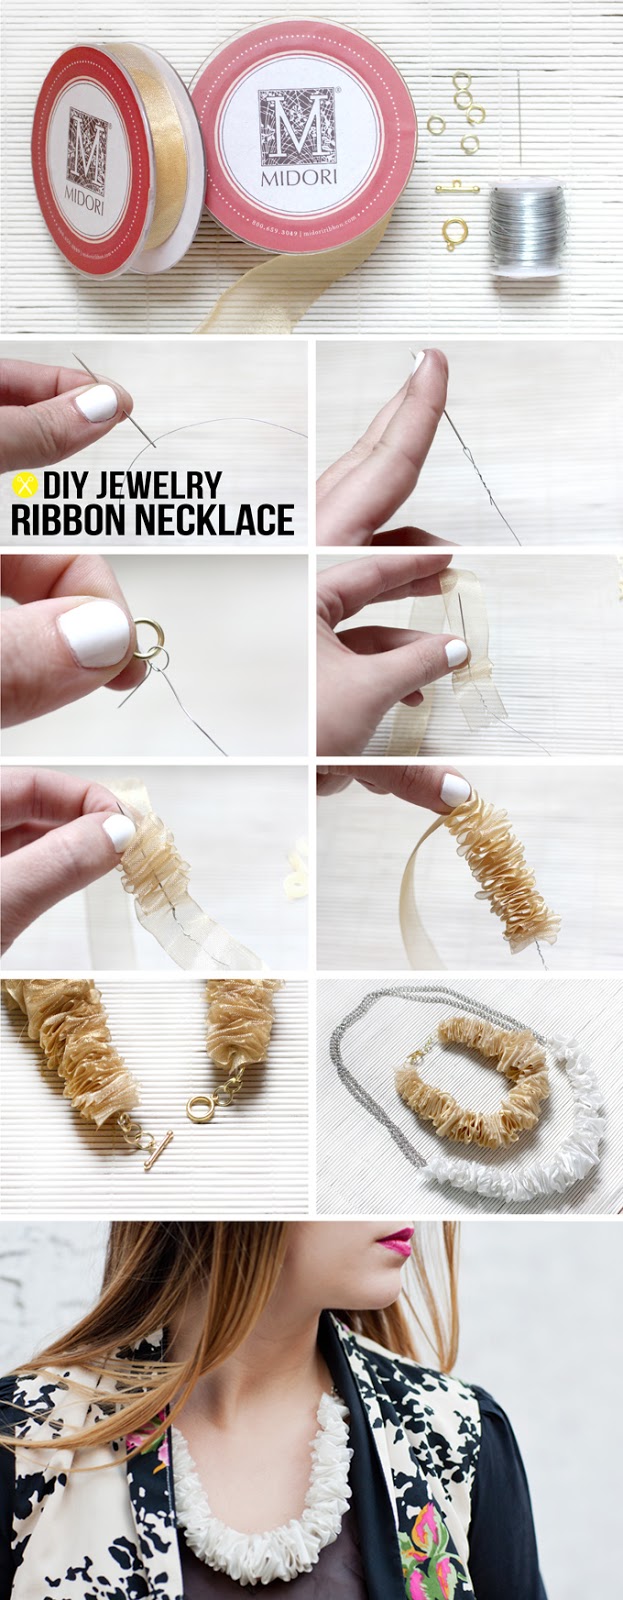 Ribbon Necklace Jewelry Making  Jewelry Findings Necklace Diy